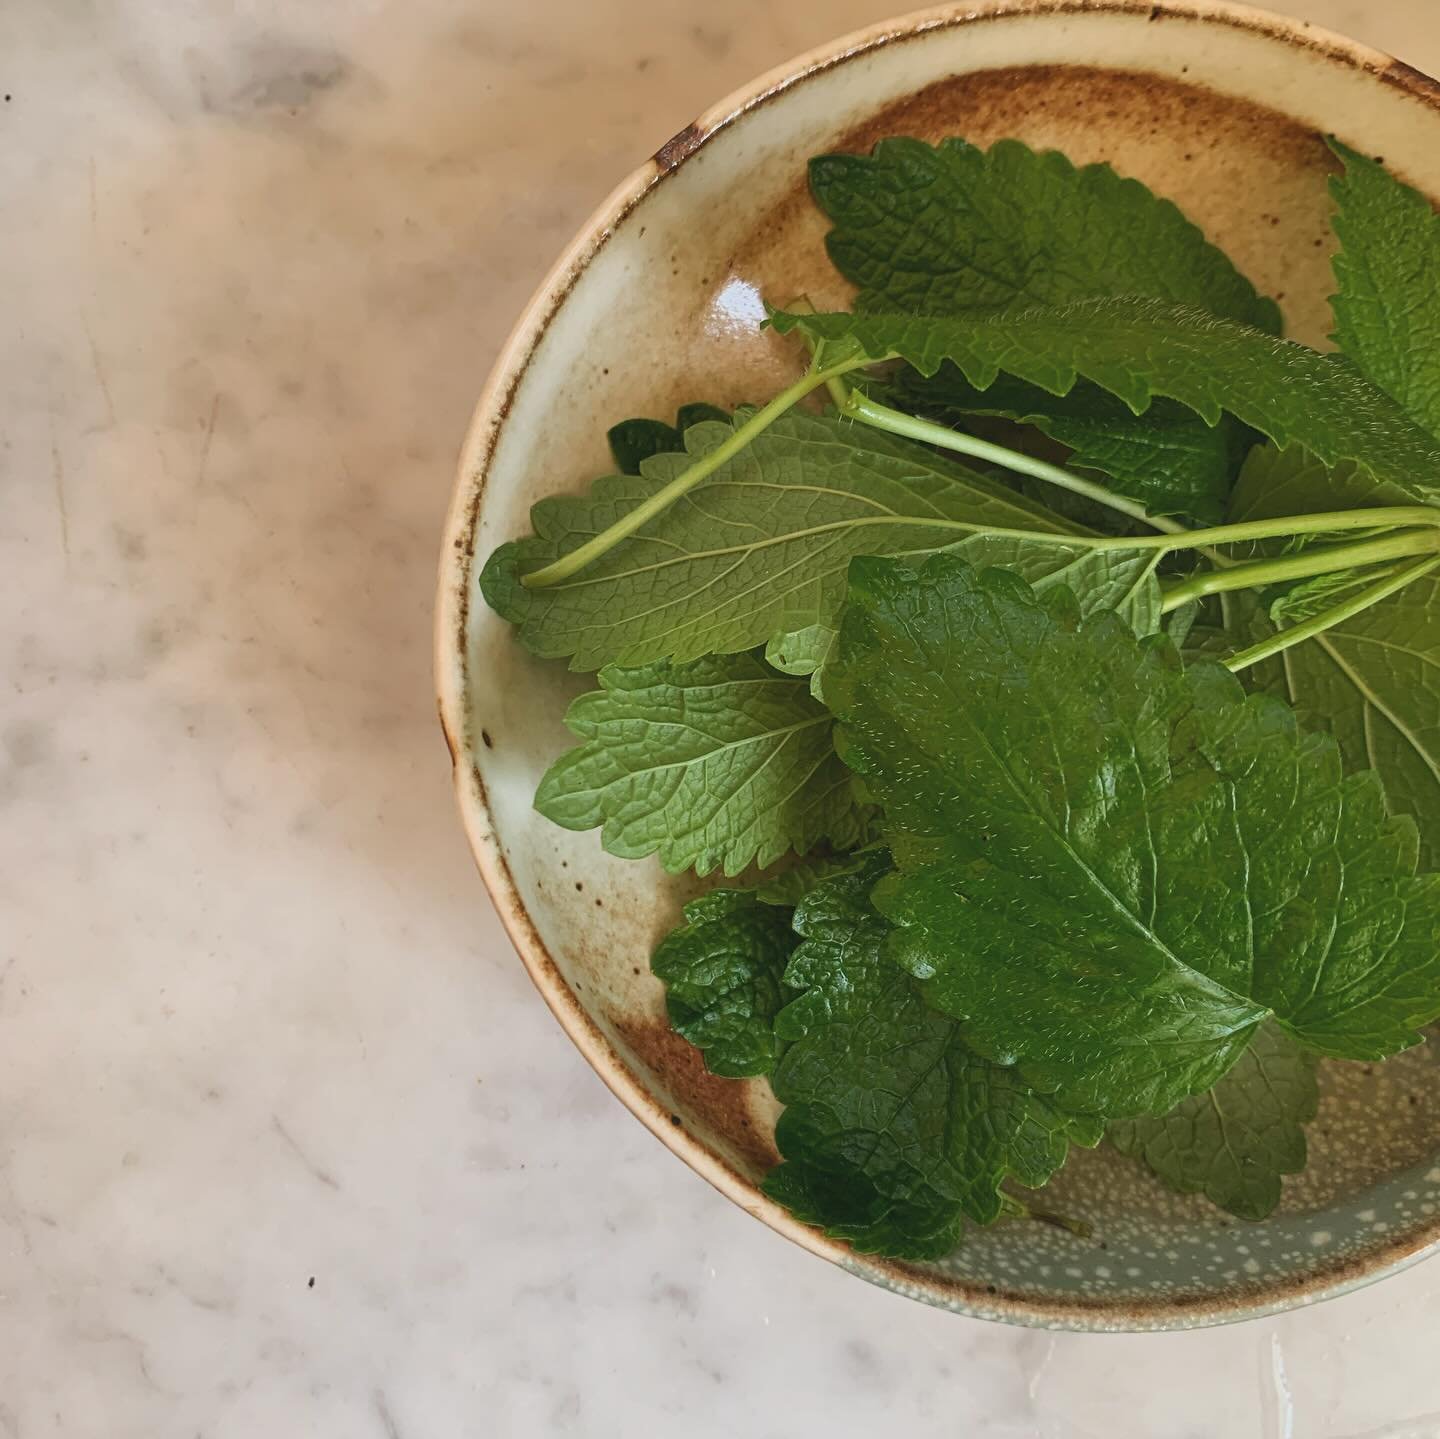 We&rsquo;ve had so much lemon balm volunteering in the garden at my house! 

I made some lemon balm pesto following the pesto template recipe from @chestnutschoolherbs in their book The Healing Garden and it is so delicious. I was super skeptical abo